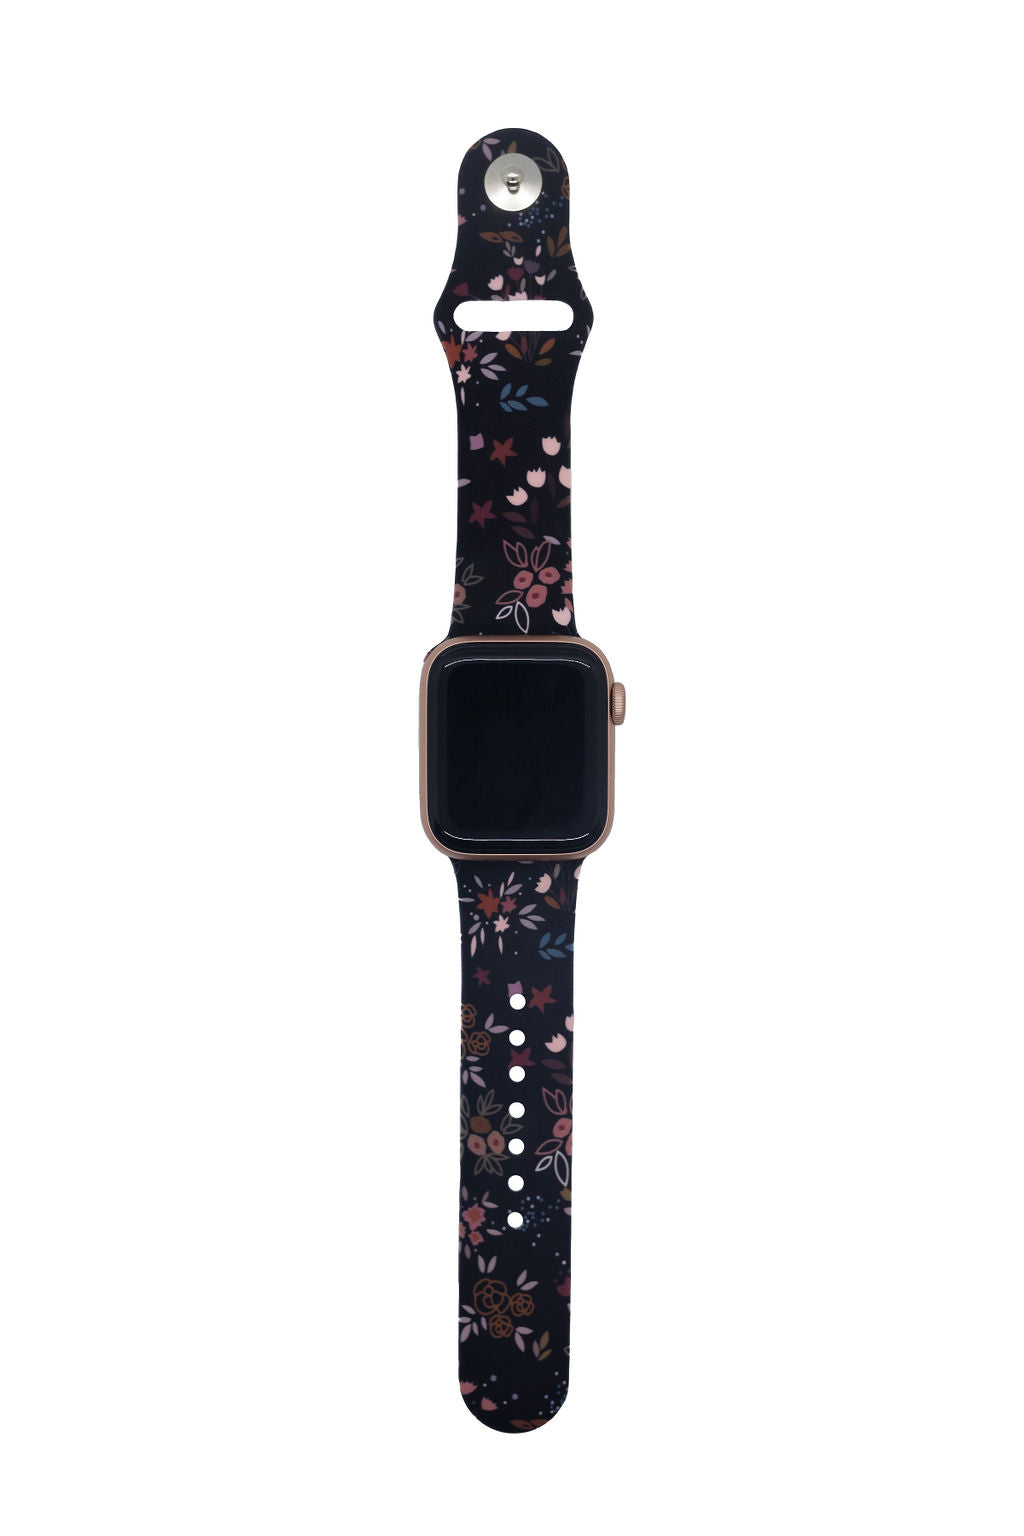 Midnight Floral - Apple Watch Band